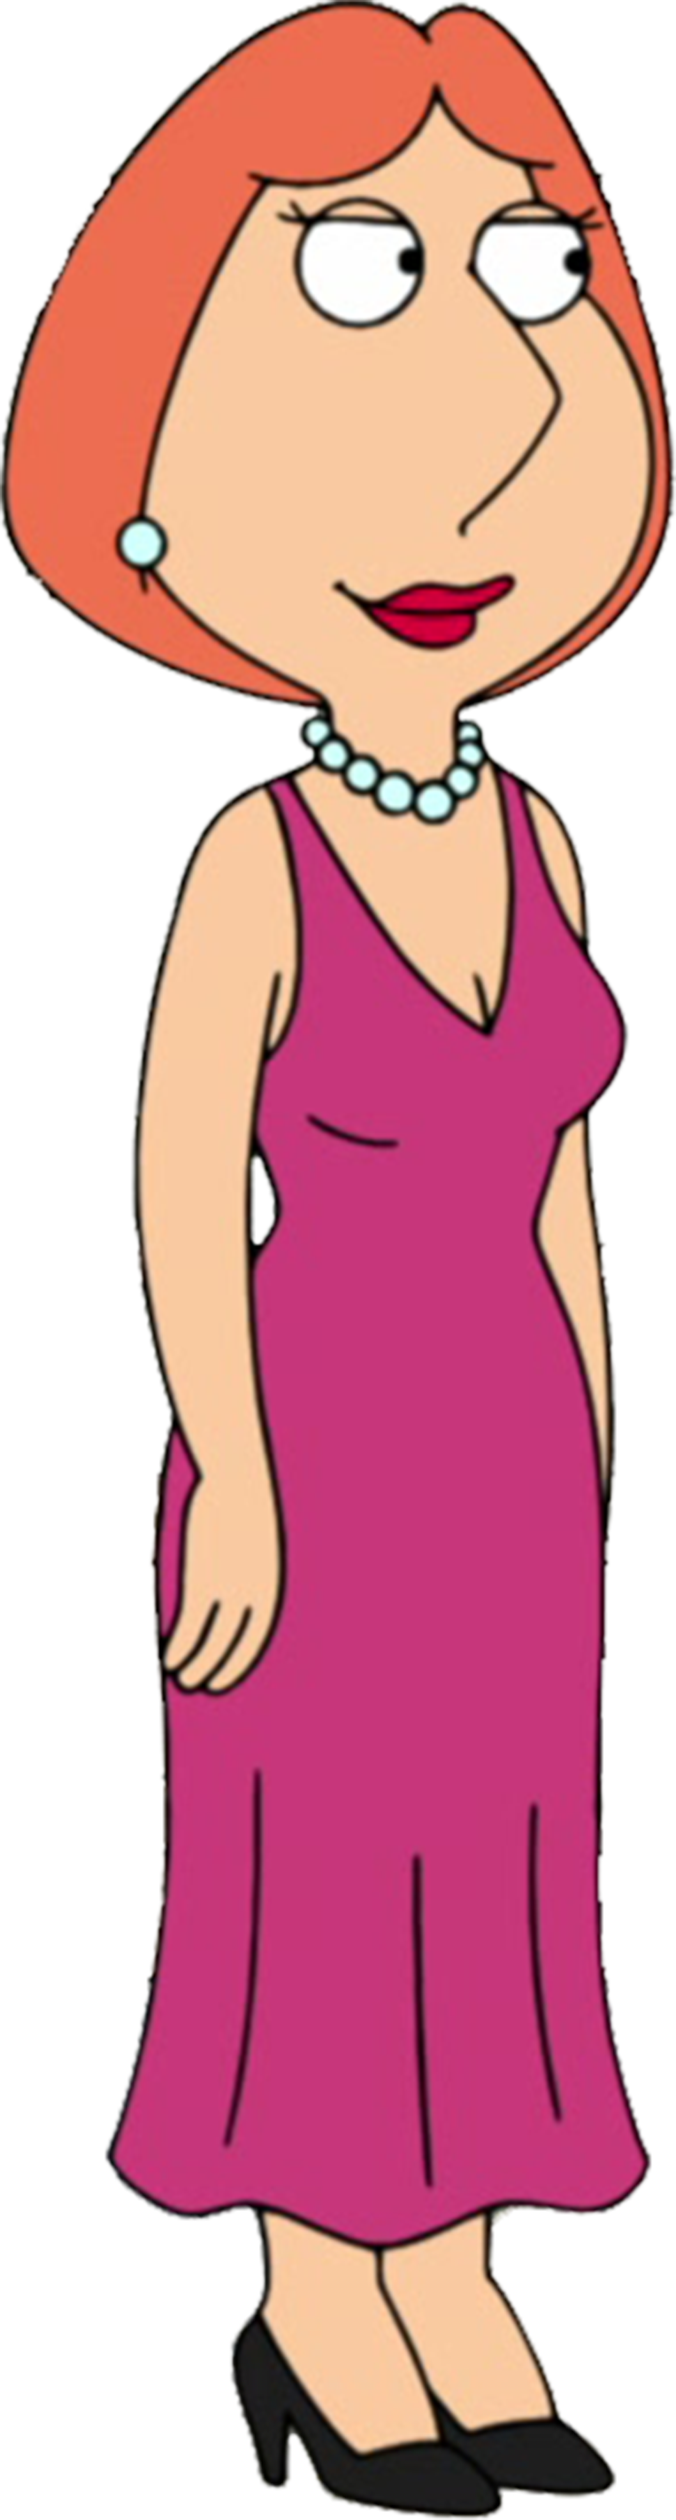 Lois griffin in her magenta dress vector by homersimpson on